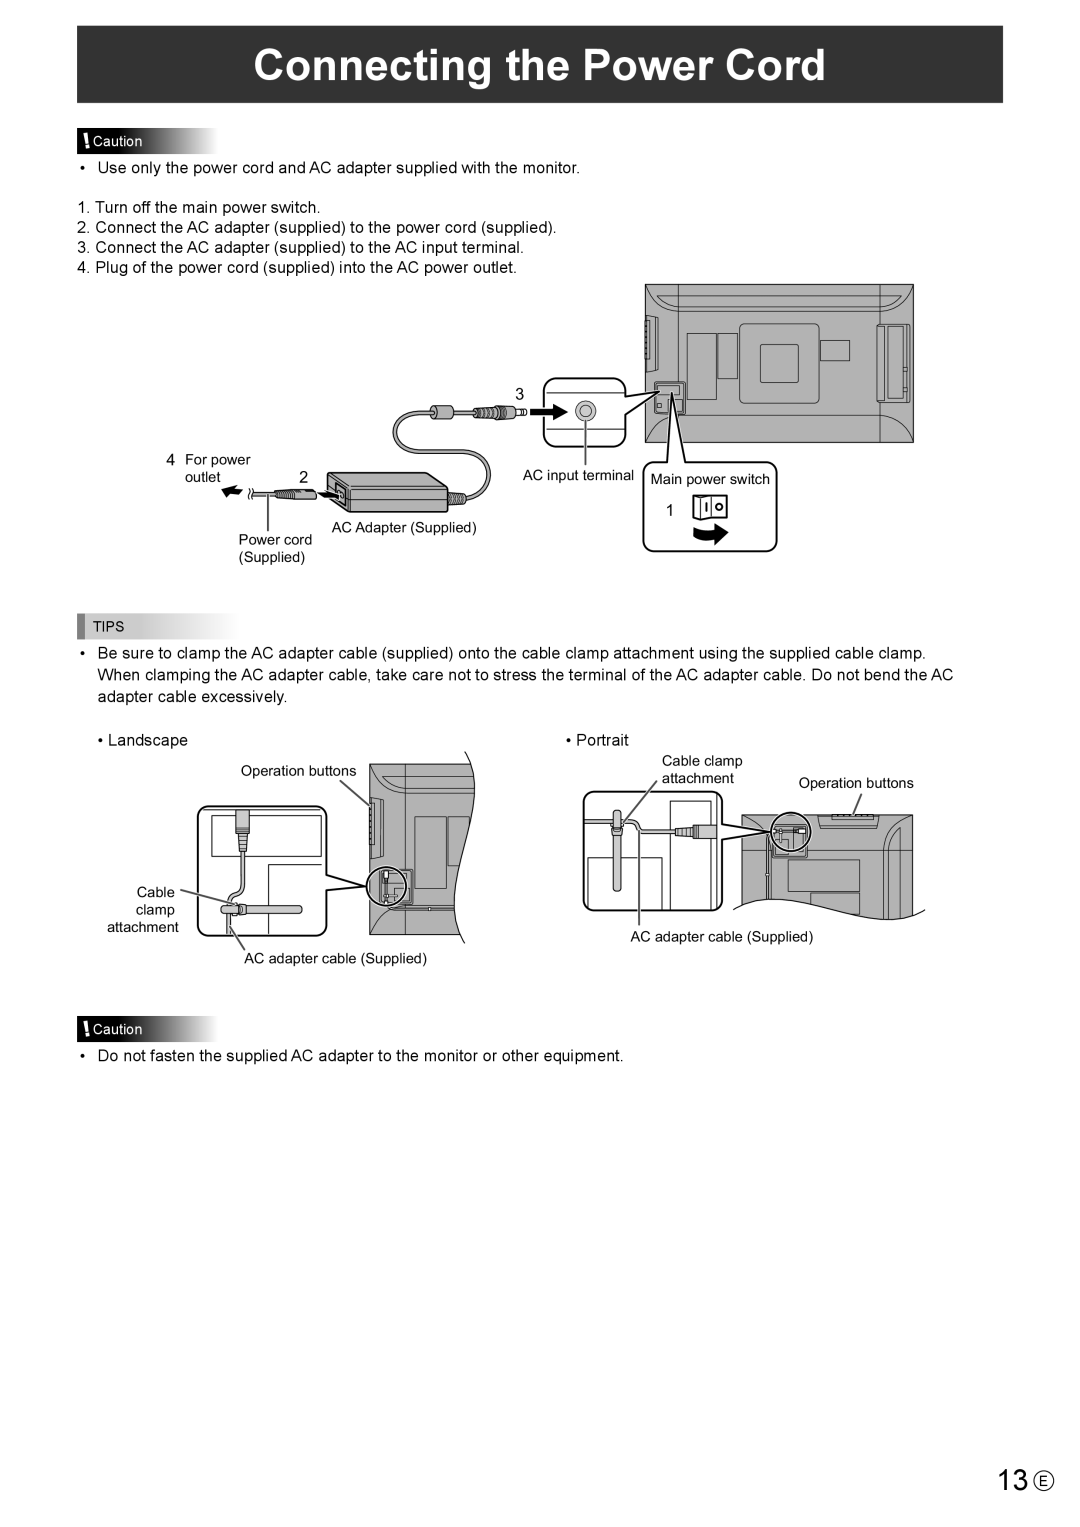 Sharp PN-K321 operation manual Connecting the Power Cord, 13 E 